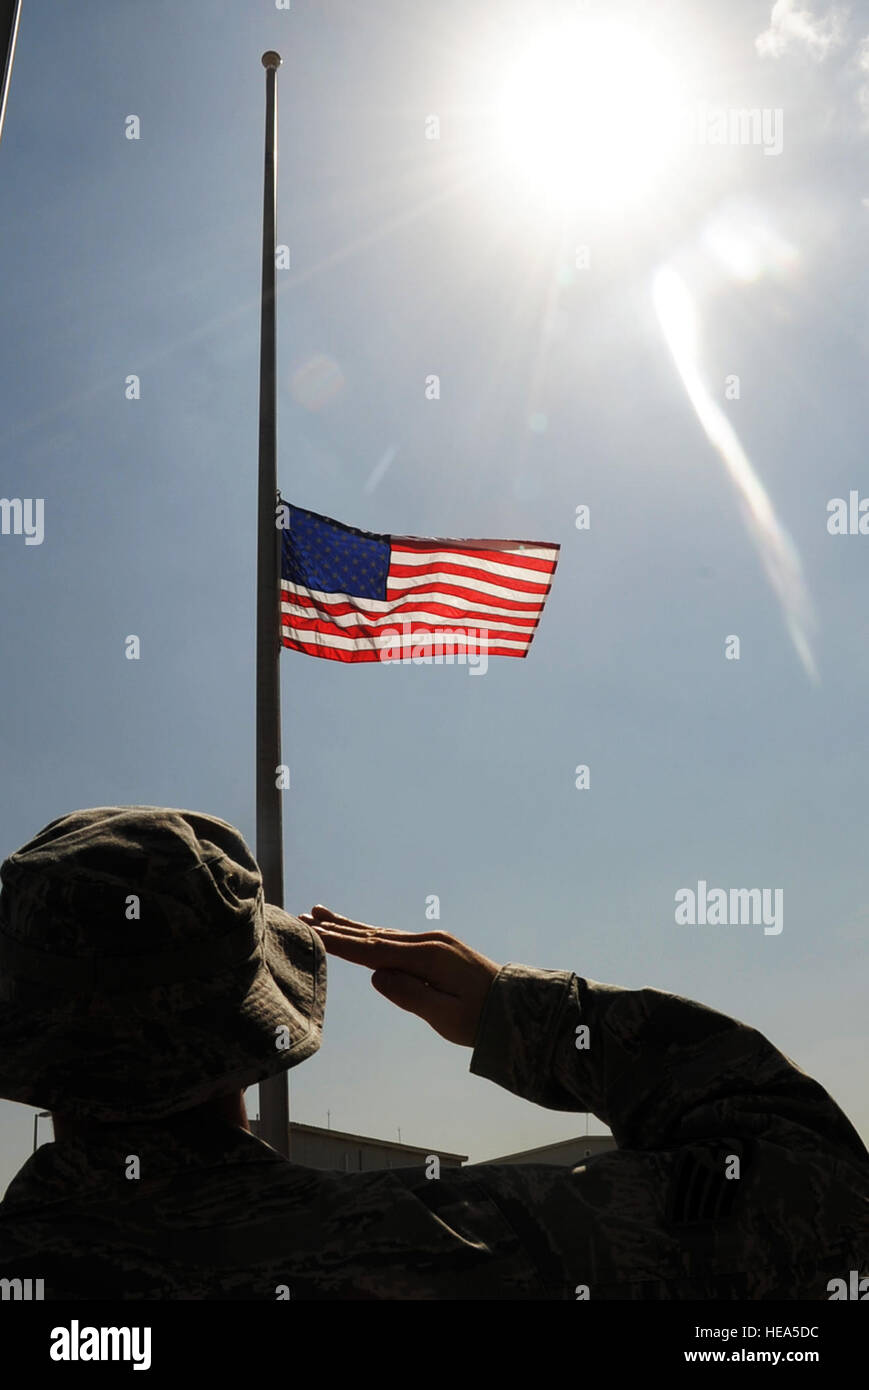 An Airman assigned to the 380th Air Expeditionary Wing at a non-disclosed base in Southwest Asia salutes the American flag Feb. 9, 2010, that is flying at half-mast in honor of U.S. Representive John Murtha of Pennsywho died on Feb. 8. Representative Murtha was a military veteran who earned the Bronze Star and two Purple Hearts during the Vietnam War. Military installations around the world flew the flag at half-mast Feb. 9 in honor of Representative Murtha by declaration from President Barack Obama. (U.S. Air Force Photo/Master Sgt. Scott T. Sturkol Stock Photo